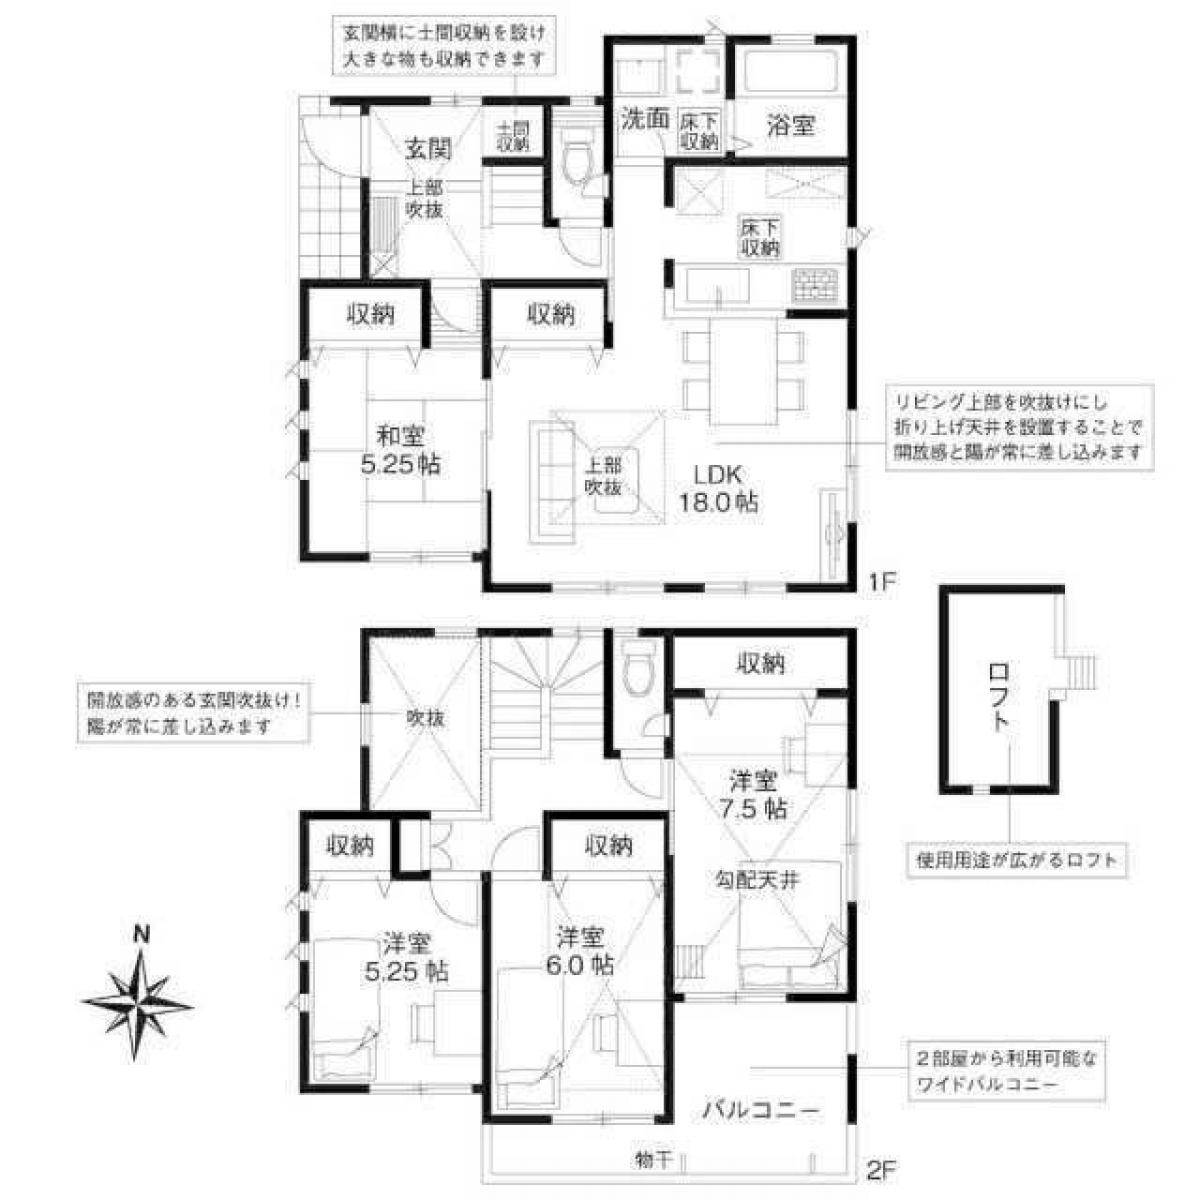 Picture of Home For Sale in Nagaokakyo Shi, Kyoto, Japan